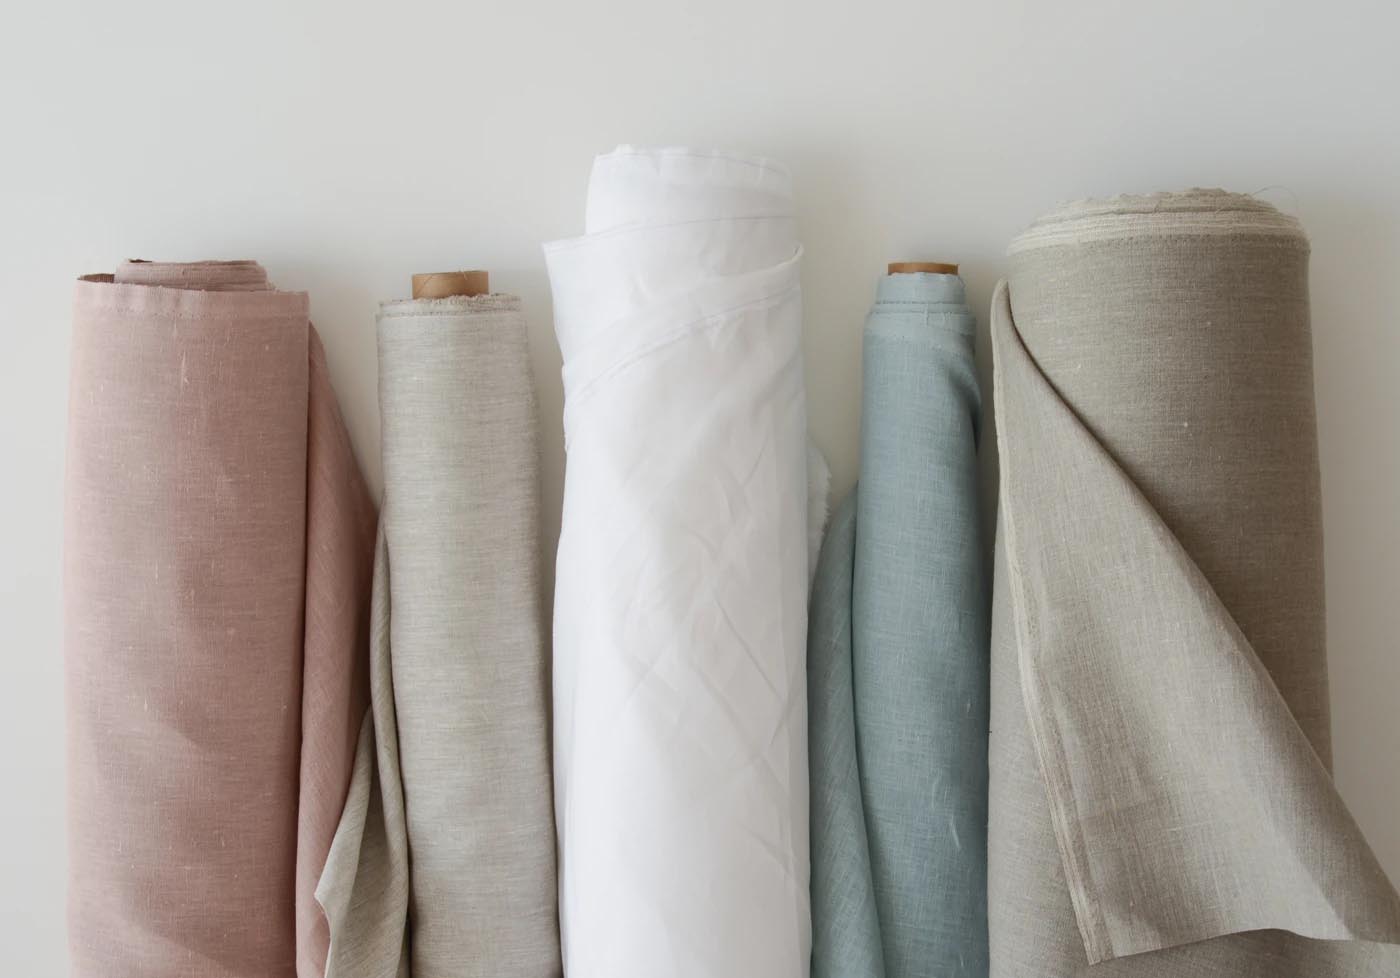 NEW TO LINEN?